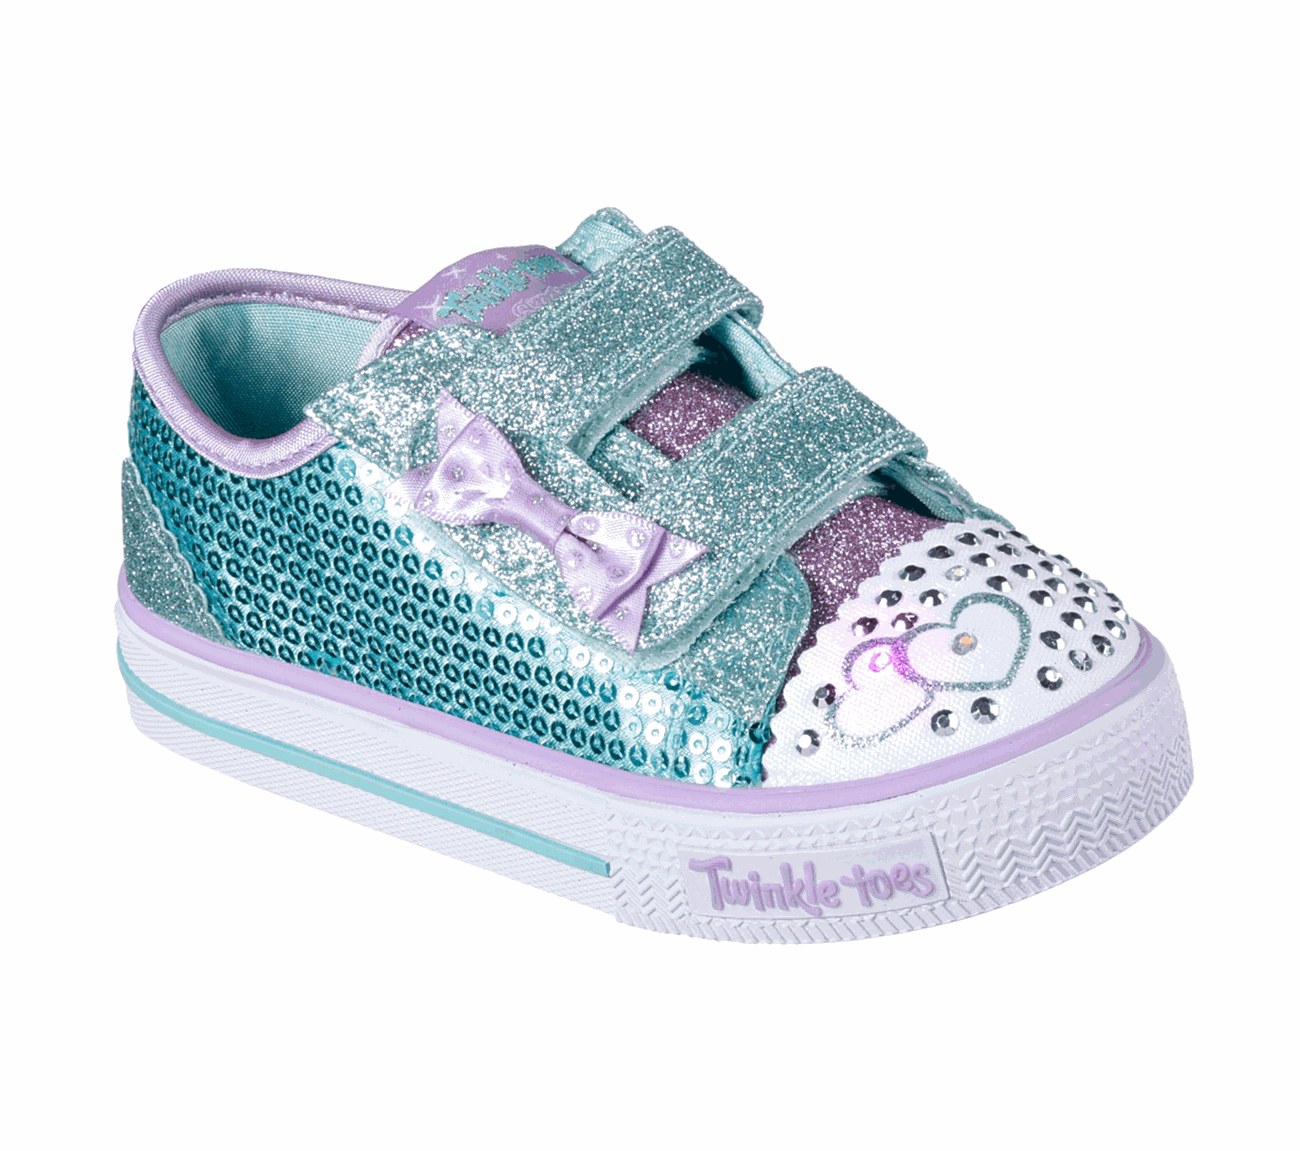 Buy SKECHERS Twinkle Toes: Shuffles - Itsy Bitsy Hook and Loop Shoes Shoes